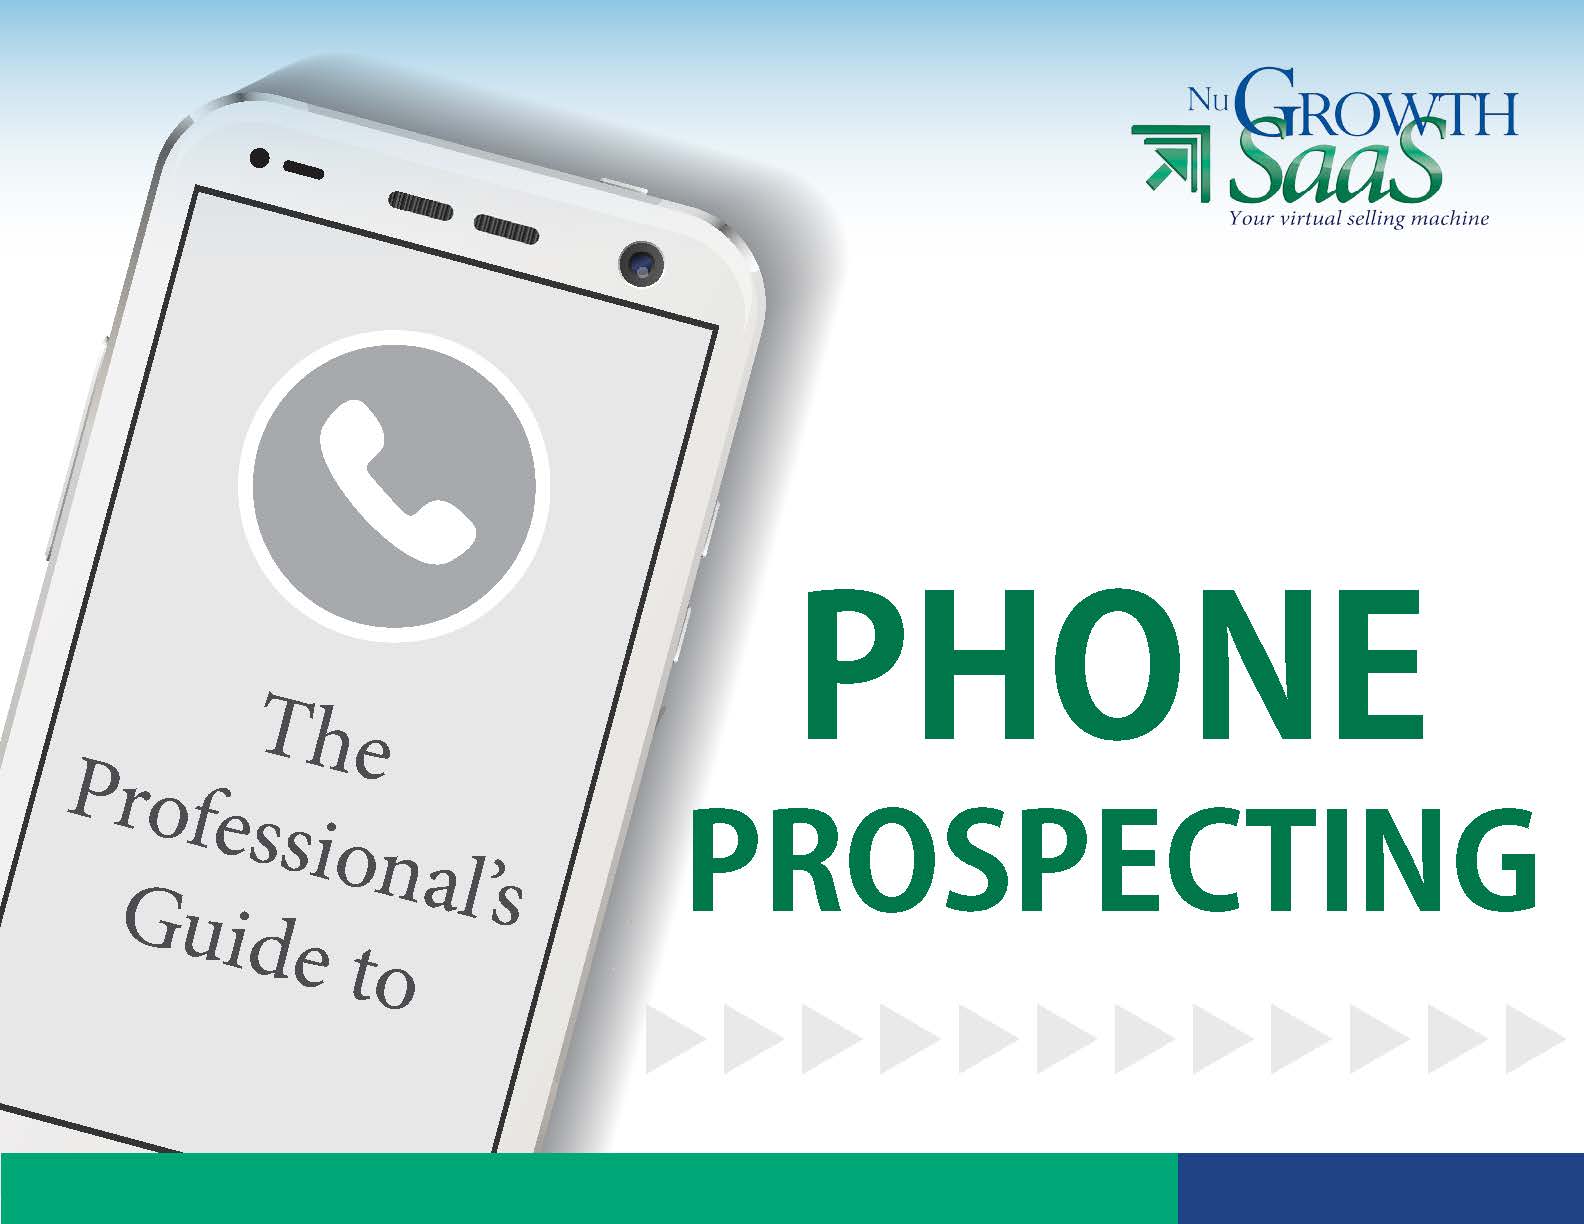 The Professional’s Guide to Phone Prospecting_Page_01